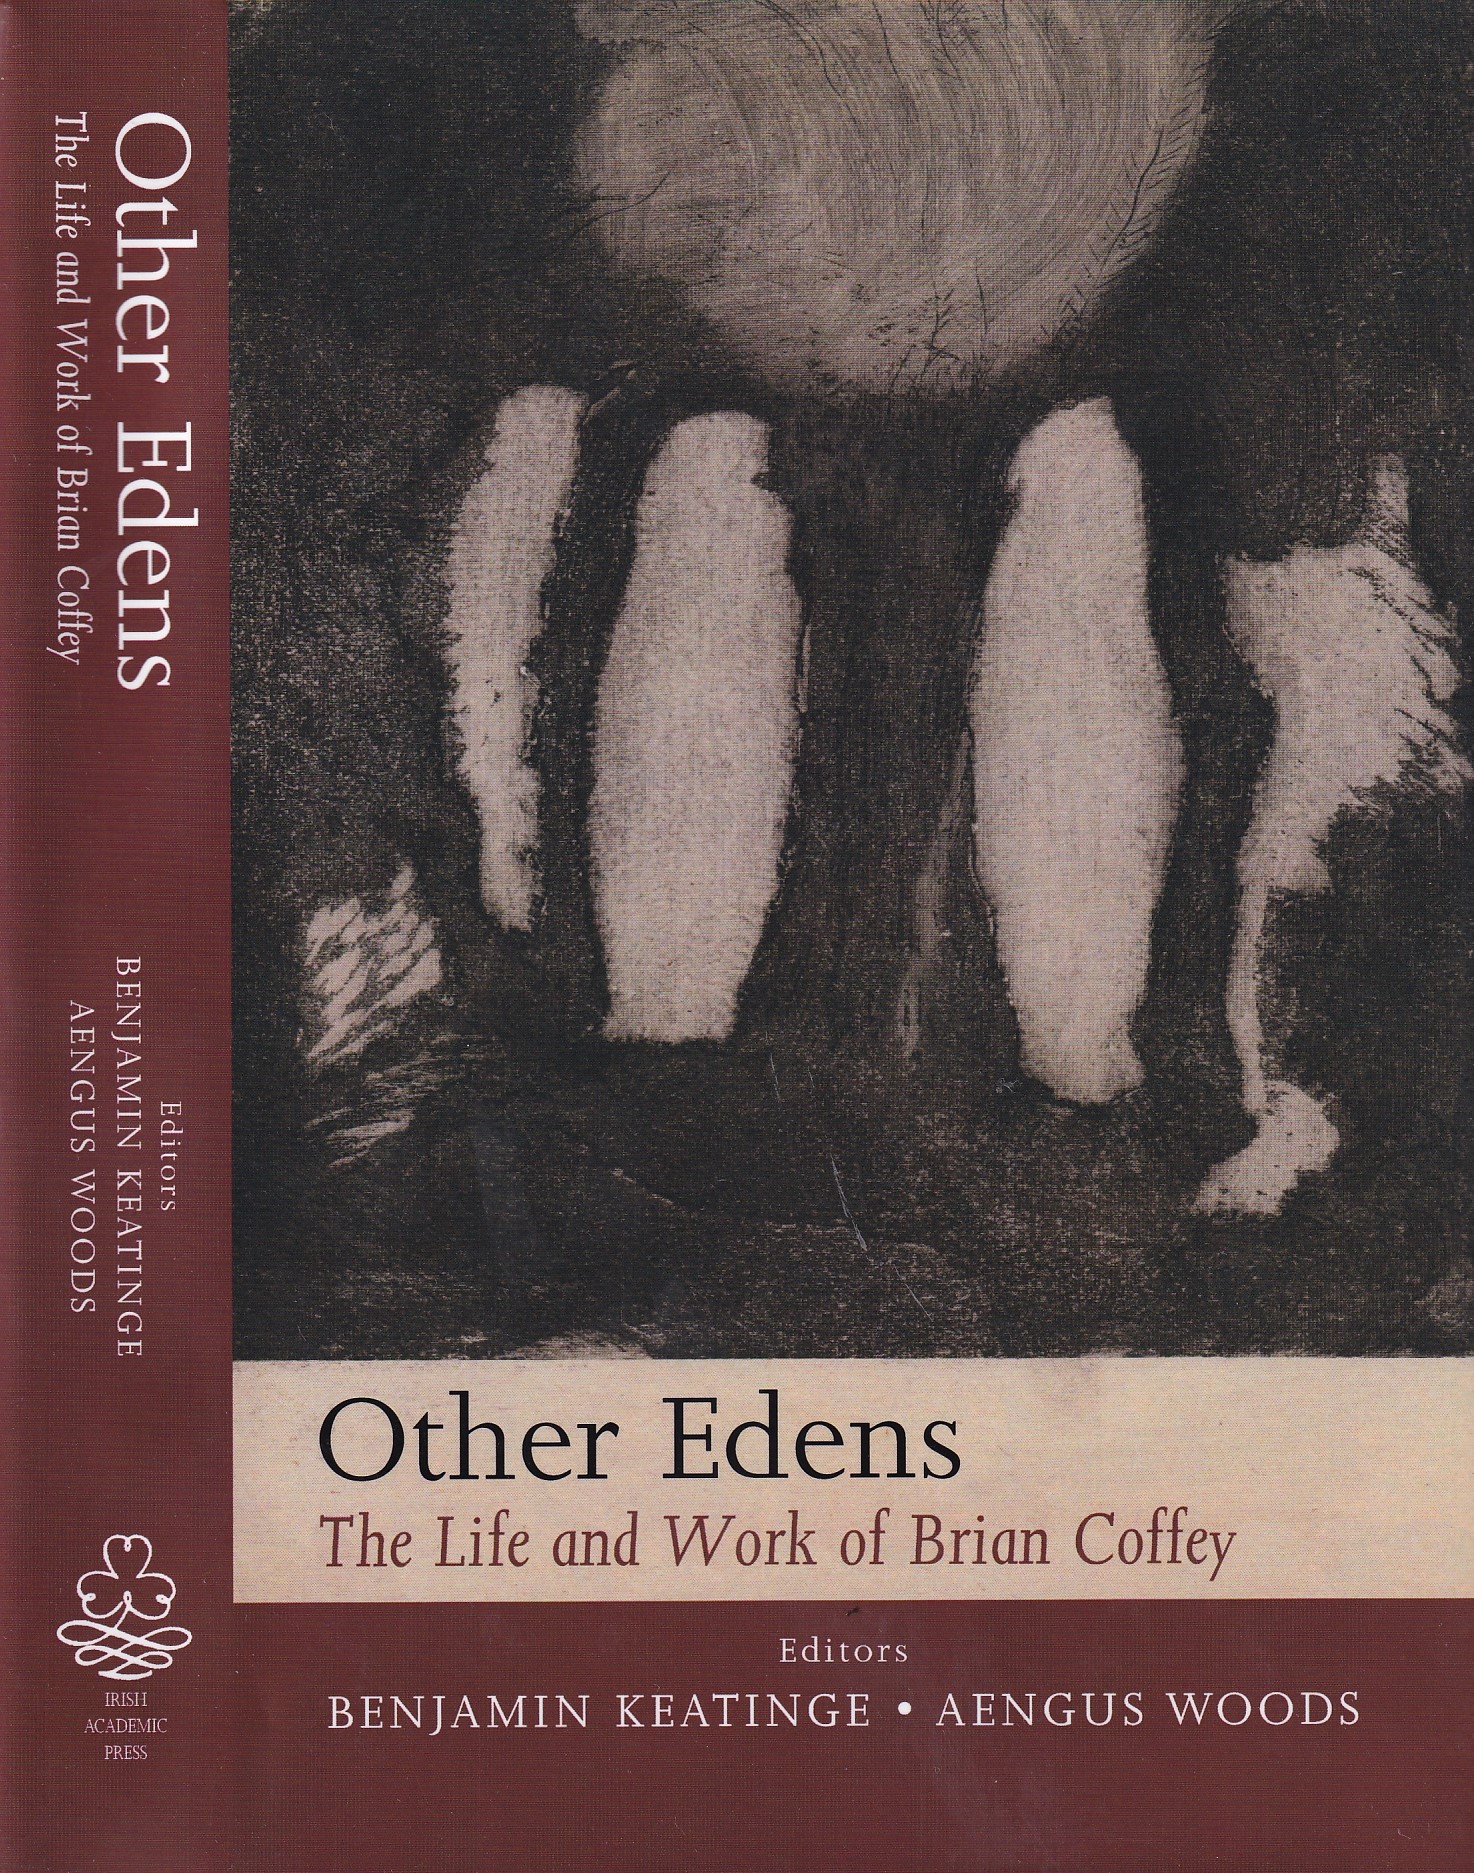 Other Edens: The Life and Work of Brian Coffey by Benjamin Keatinge and Aengus Woods